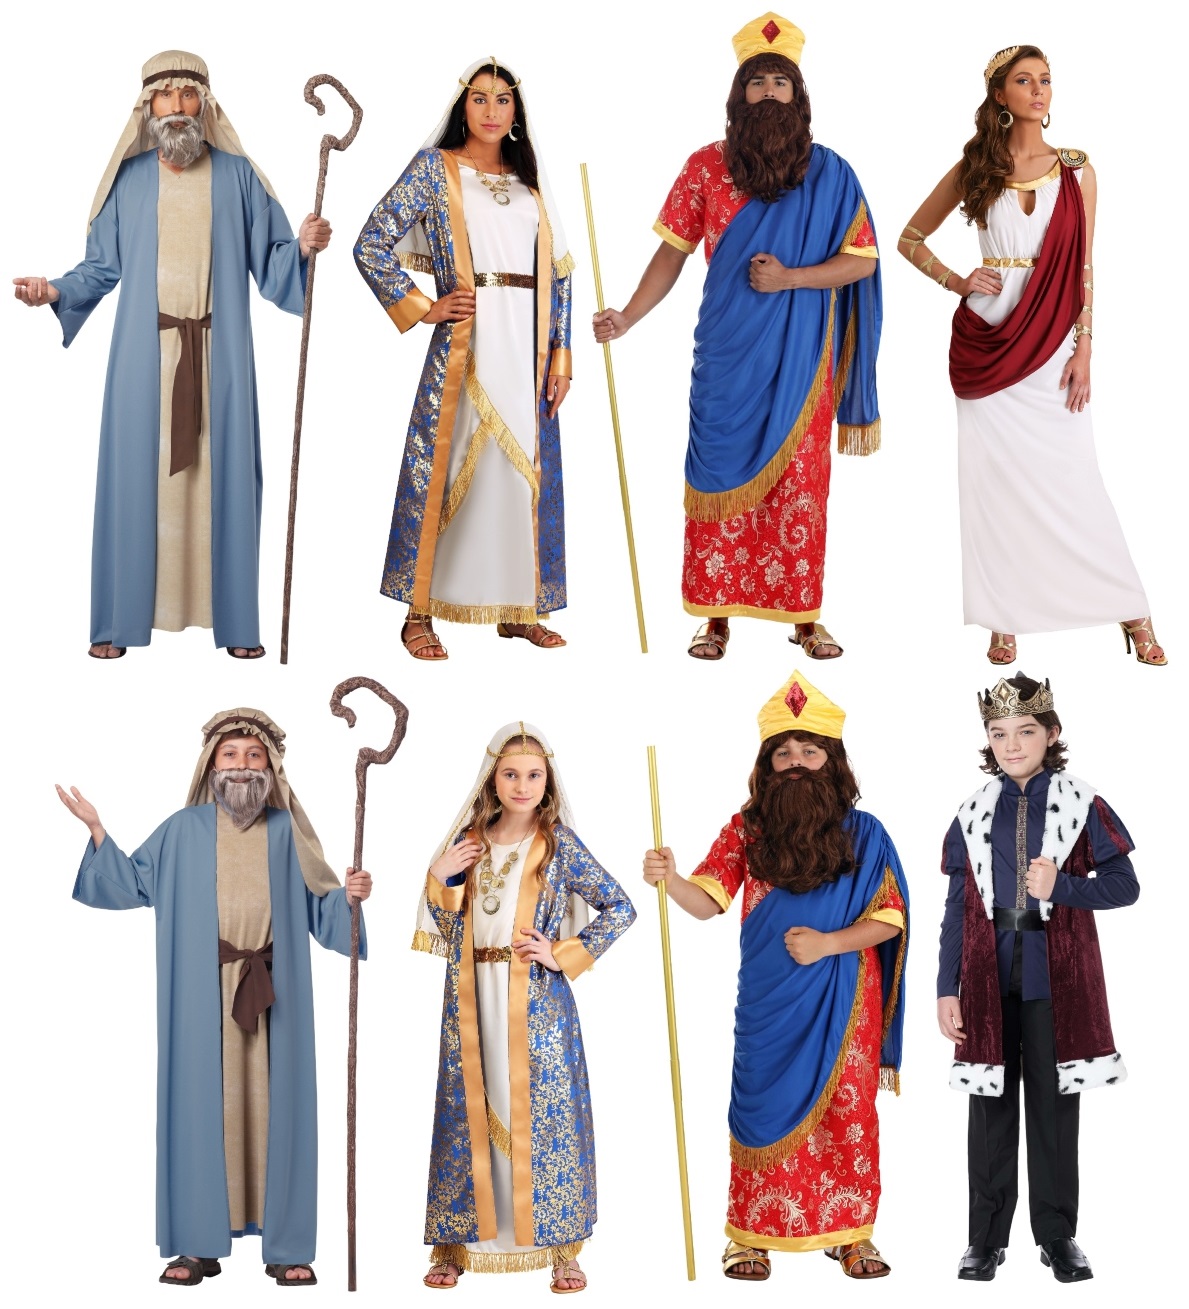 Purim Costume Ideas for Adults and Kids